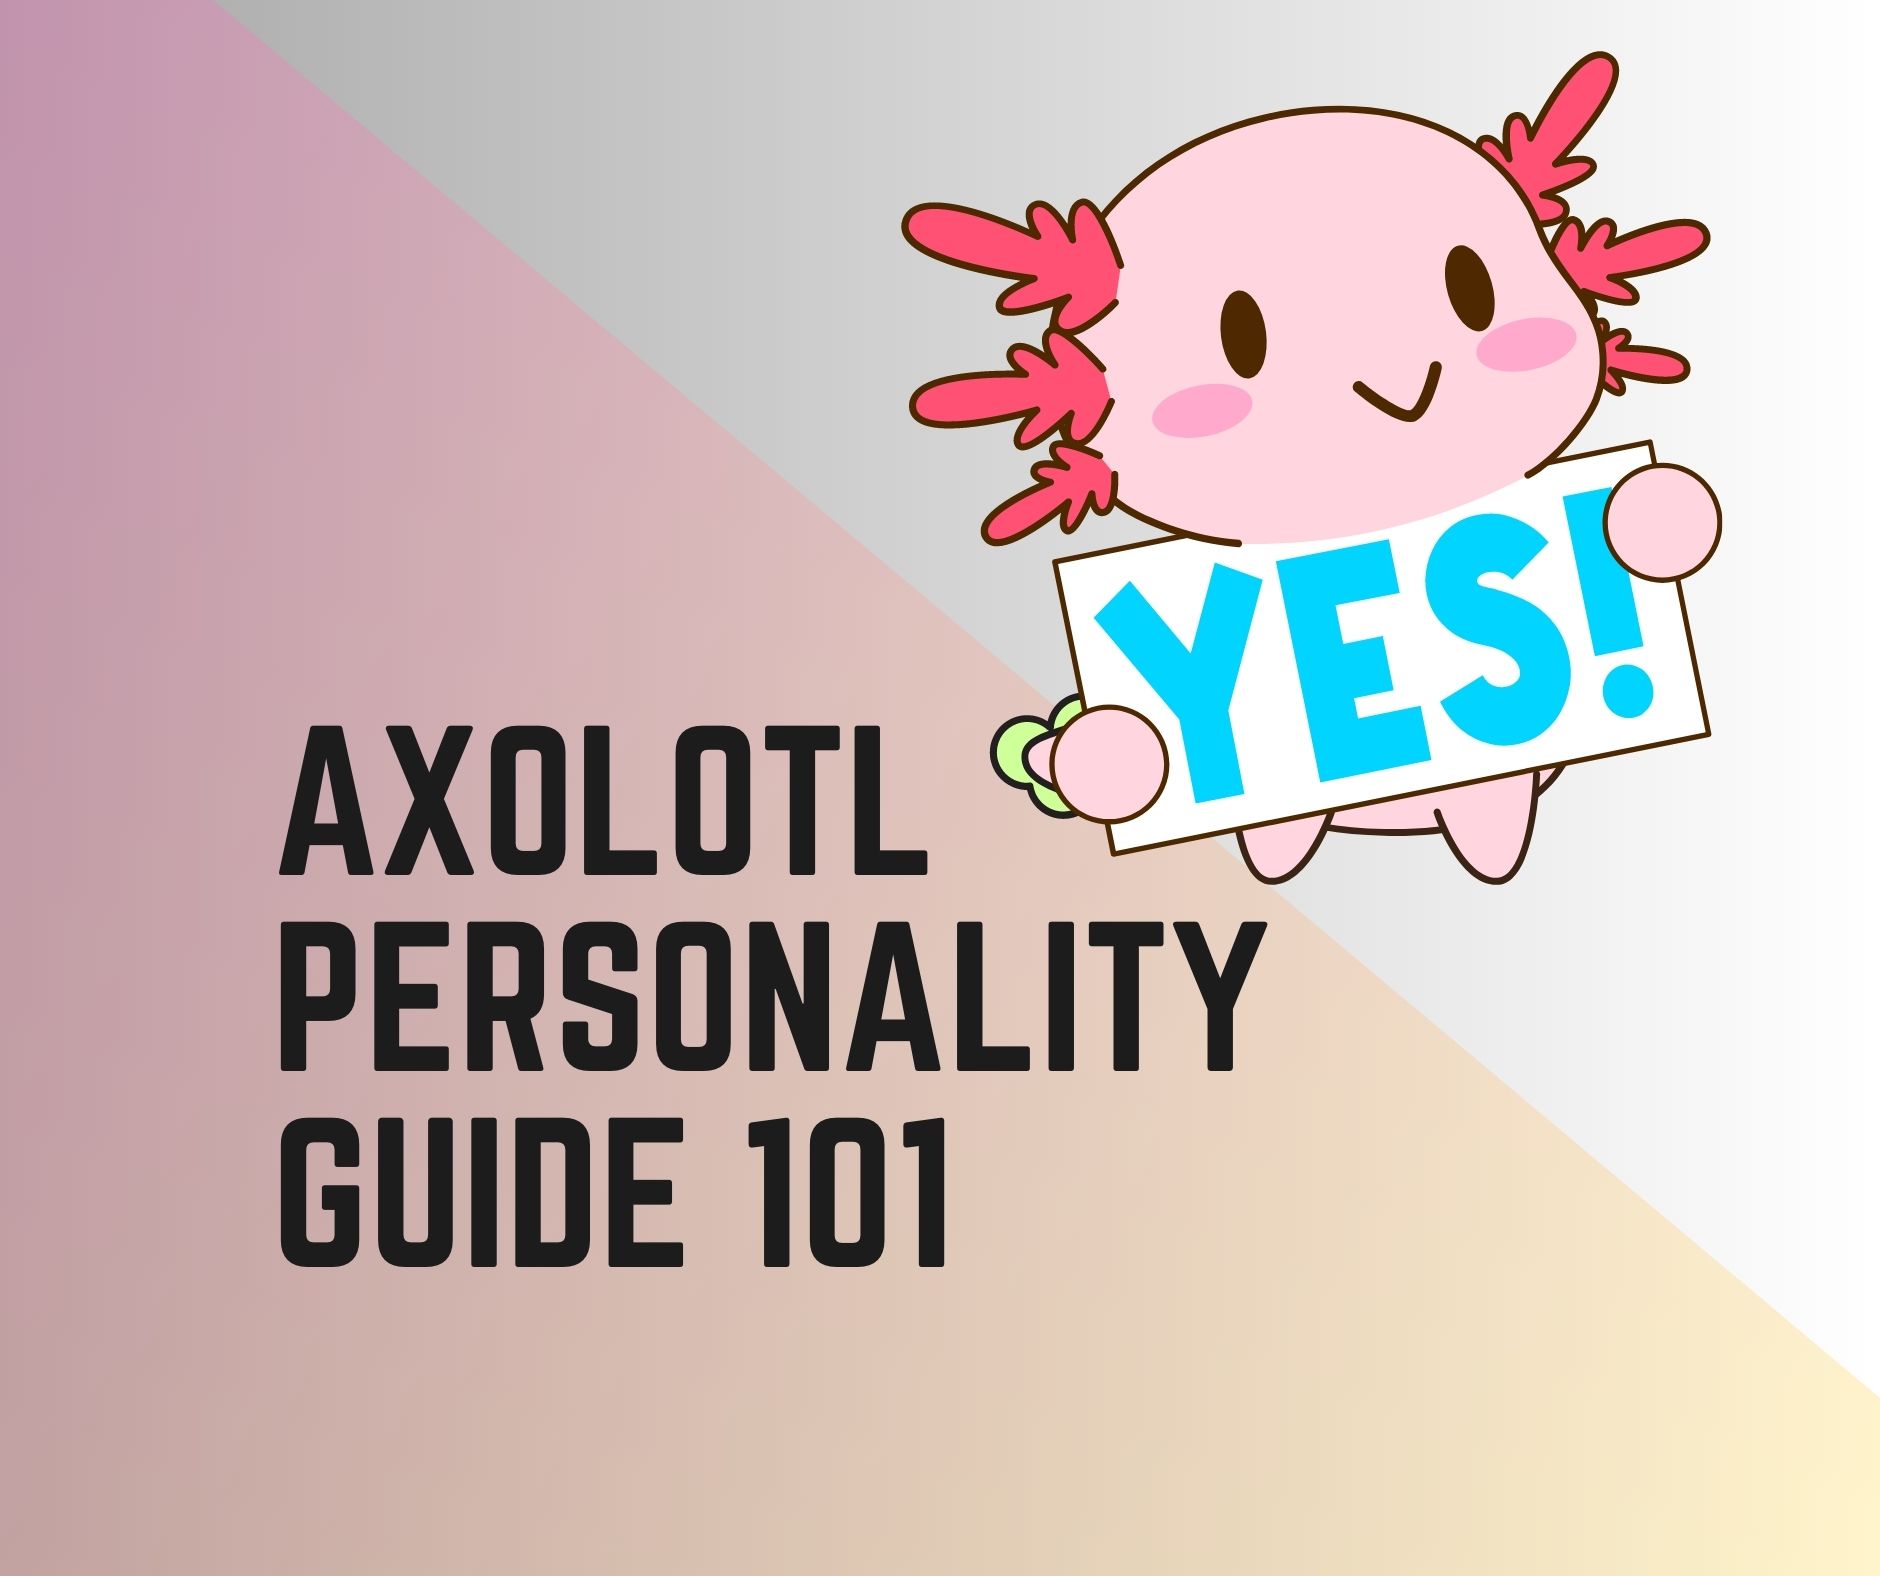 Do Axolotls Have Personalities Guide 101